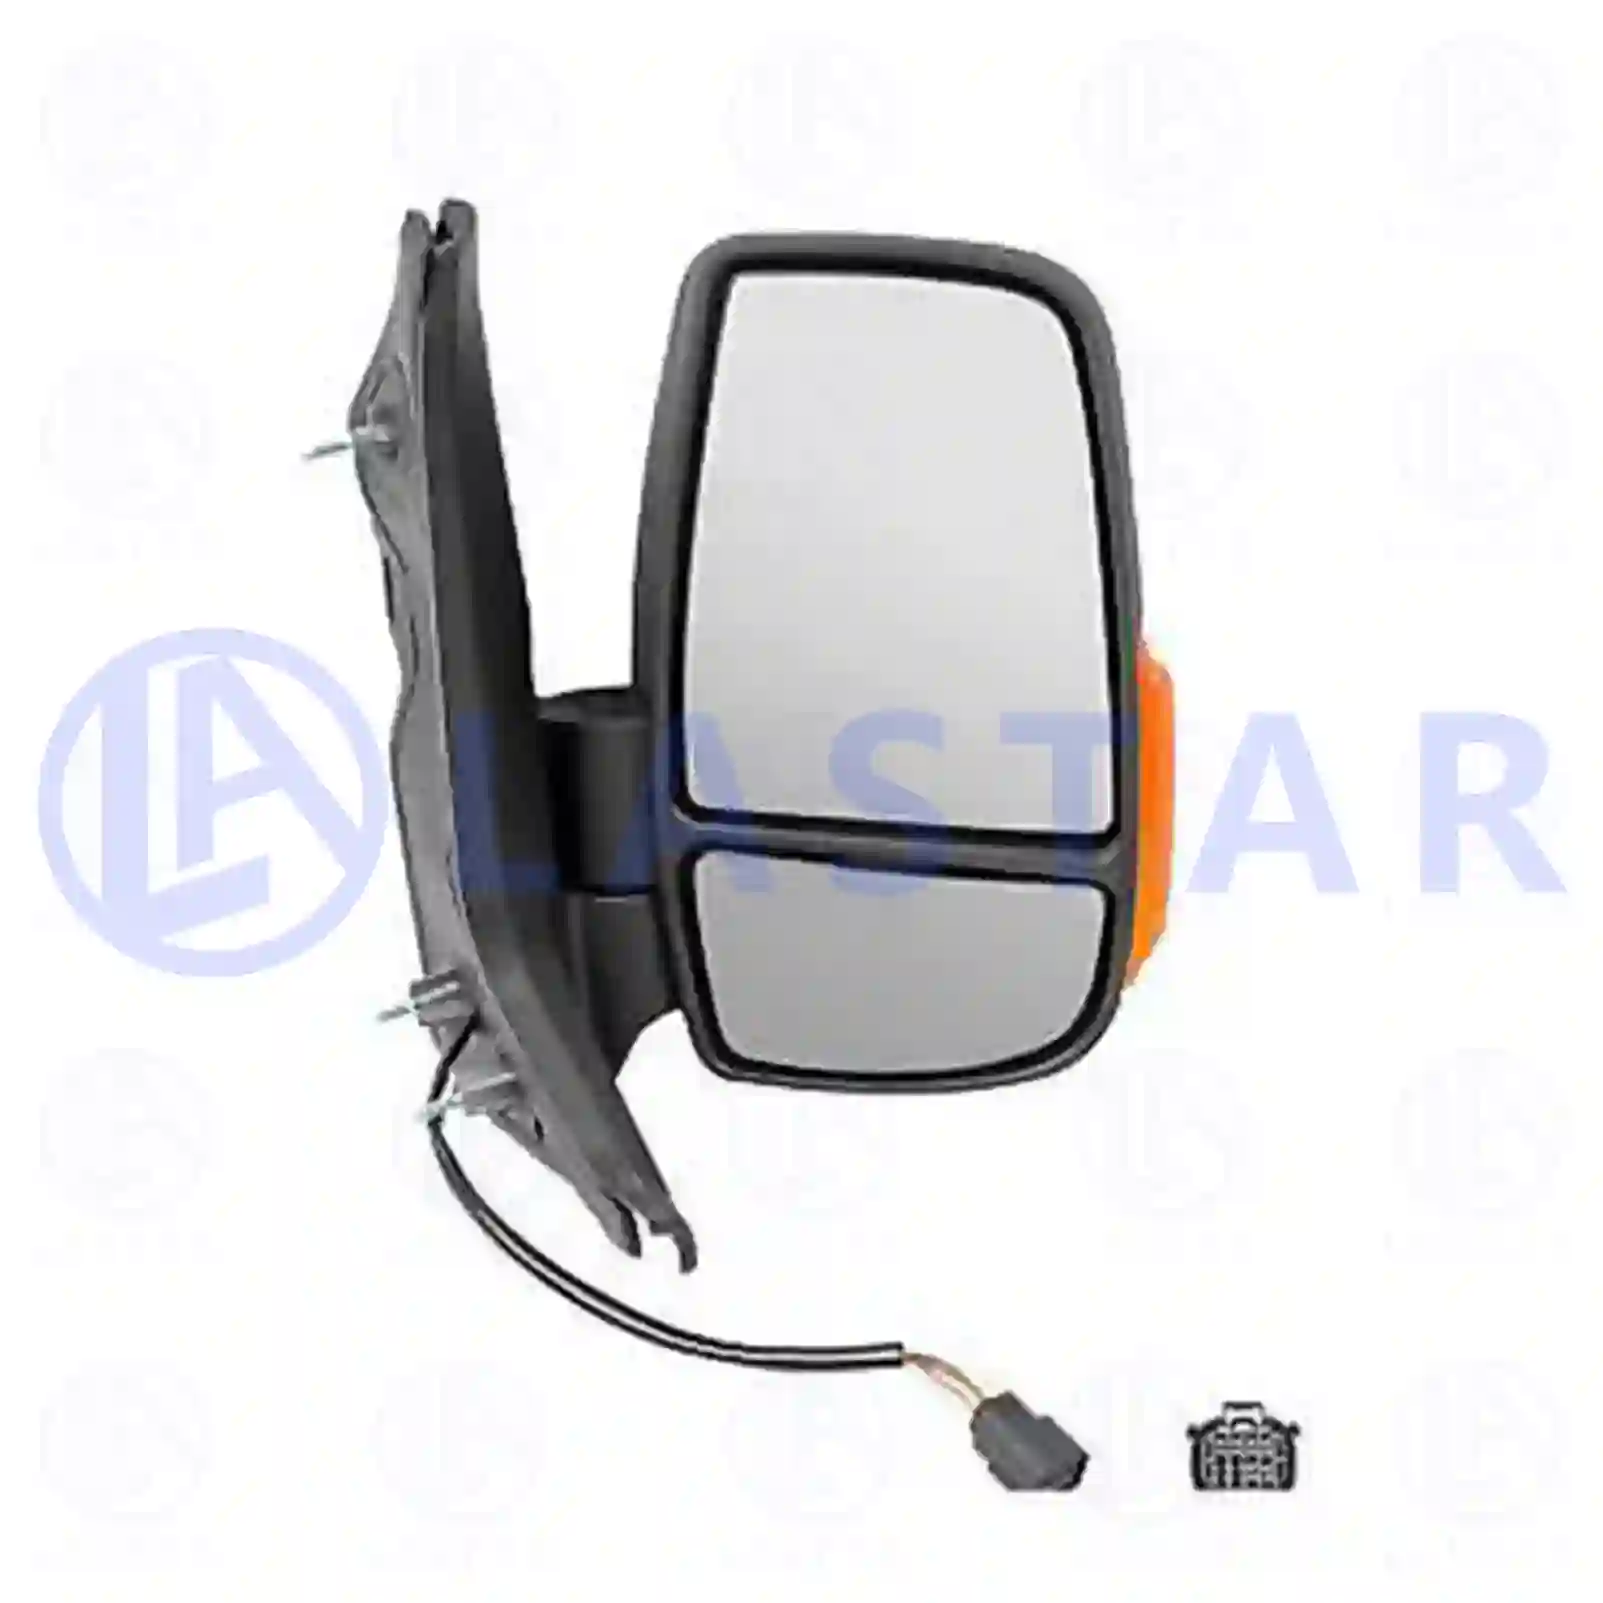 Main mirror, right, electrical, 77718458, 1871712, 1881638, 1911134, 1932576 ||  77718458 Lastar Spare Part | Truck Spare Parts, Auotomotive Spare Parts Main mirror, right, electrical, 77718458, 1871712, 1881638, 1911134, 1932576 ||  77718458 Lastar Spare Part | Truck Spare Parts, Auotomotive Spare Parts